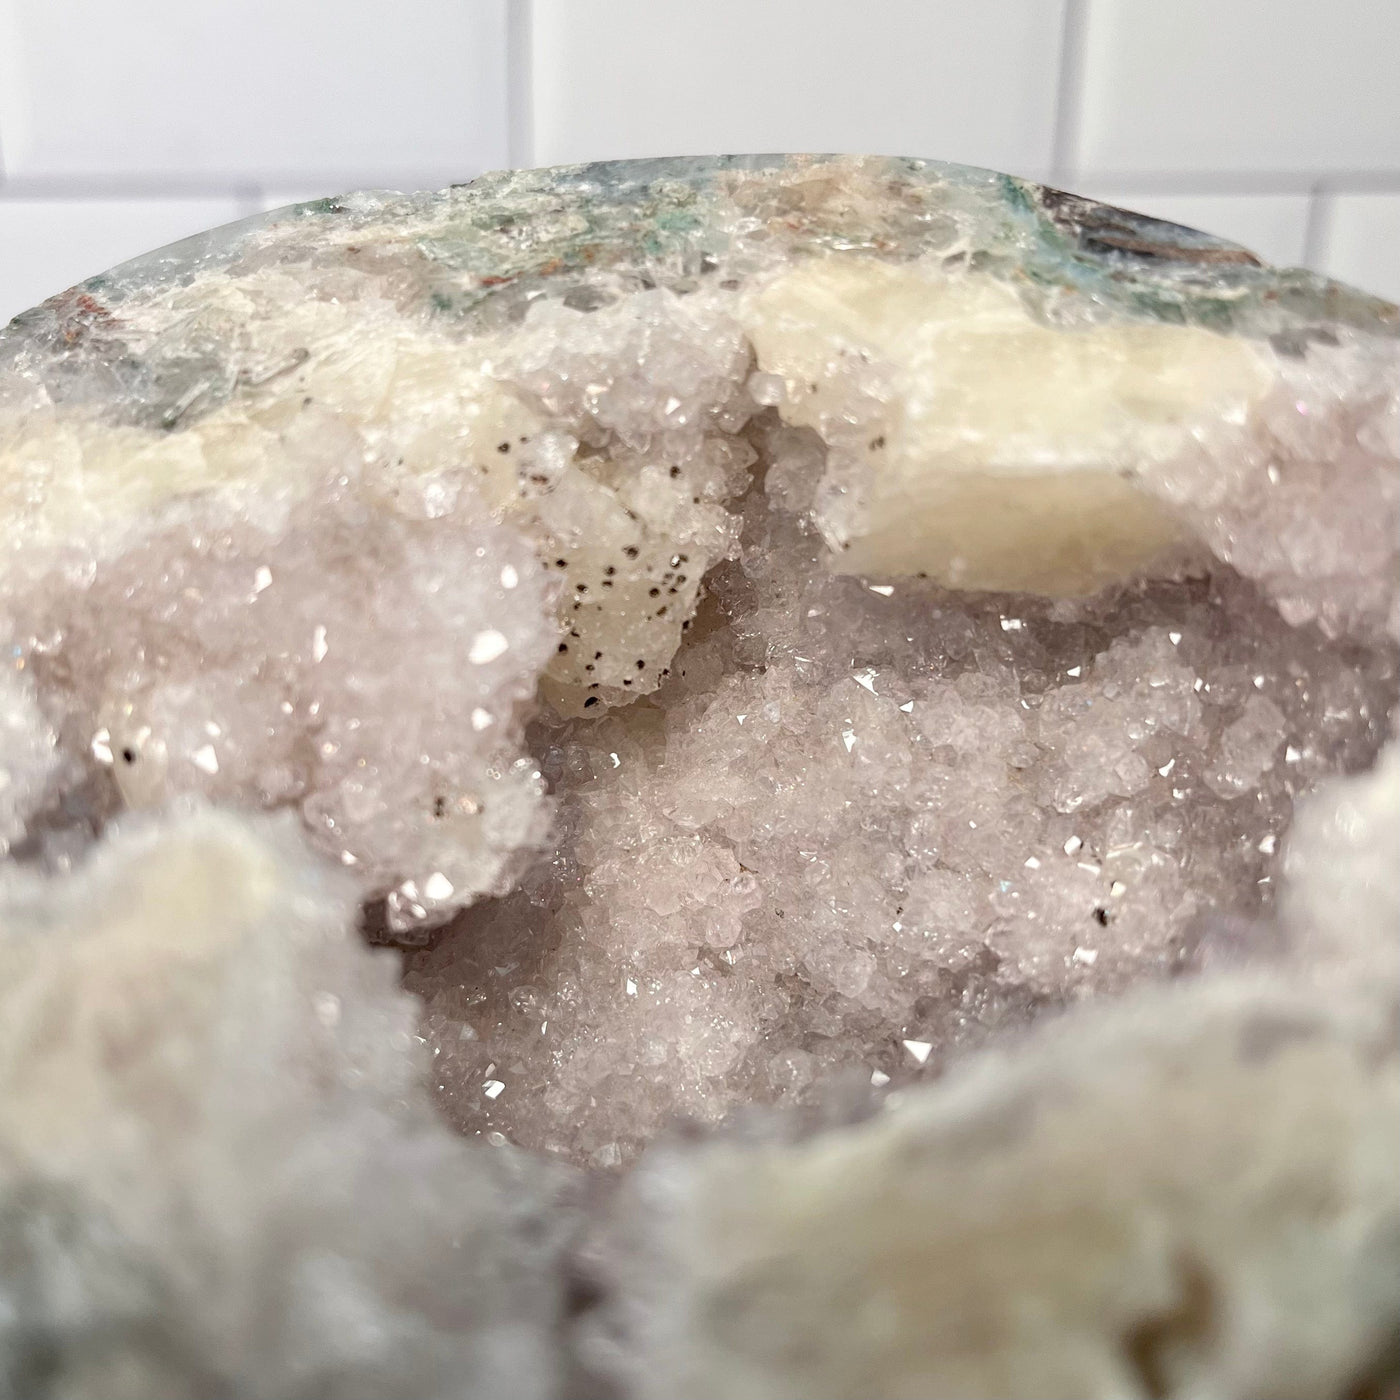 Up close view of druzy and calcite formations inside the top piece of Amethyst Druzy Geode Box.